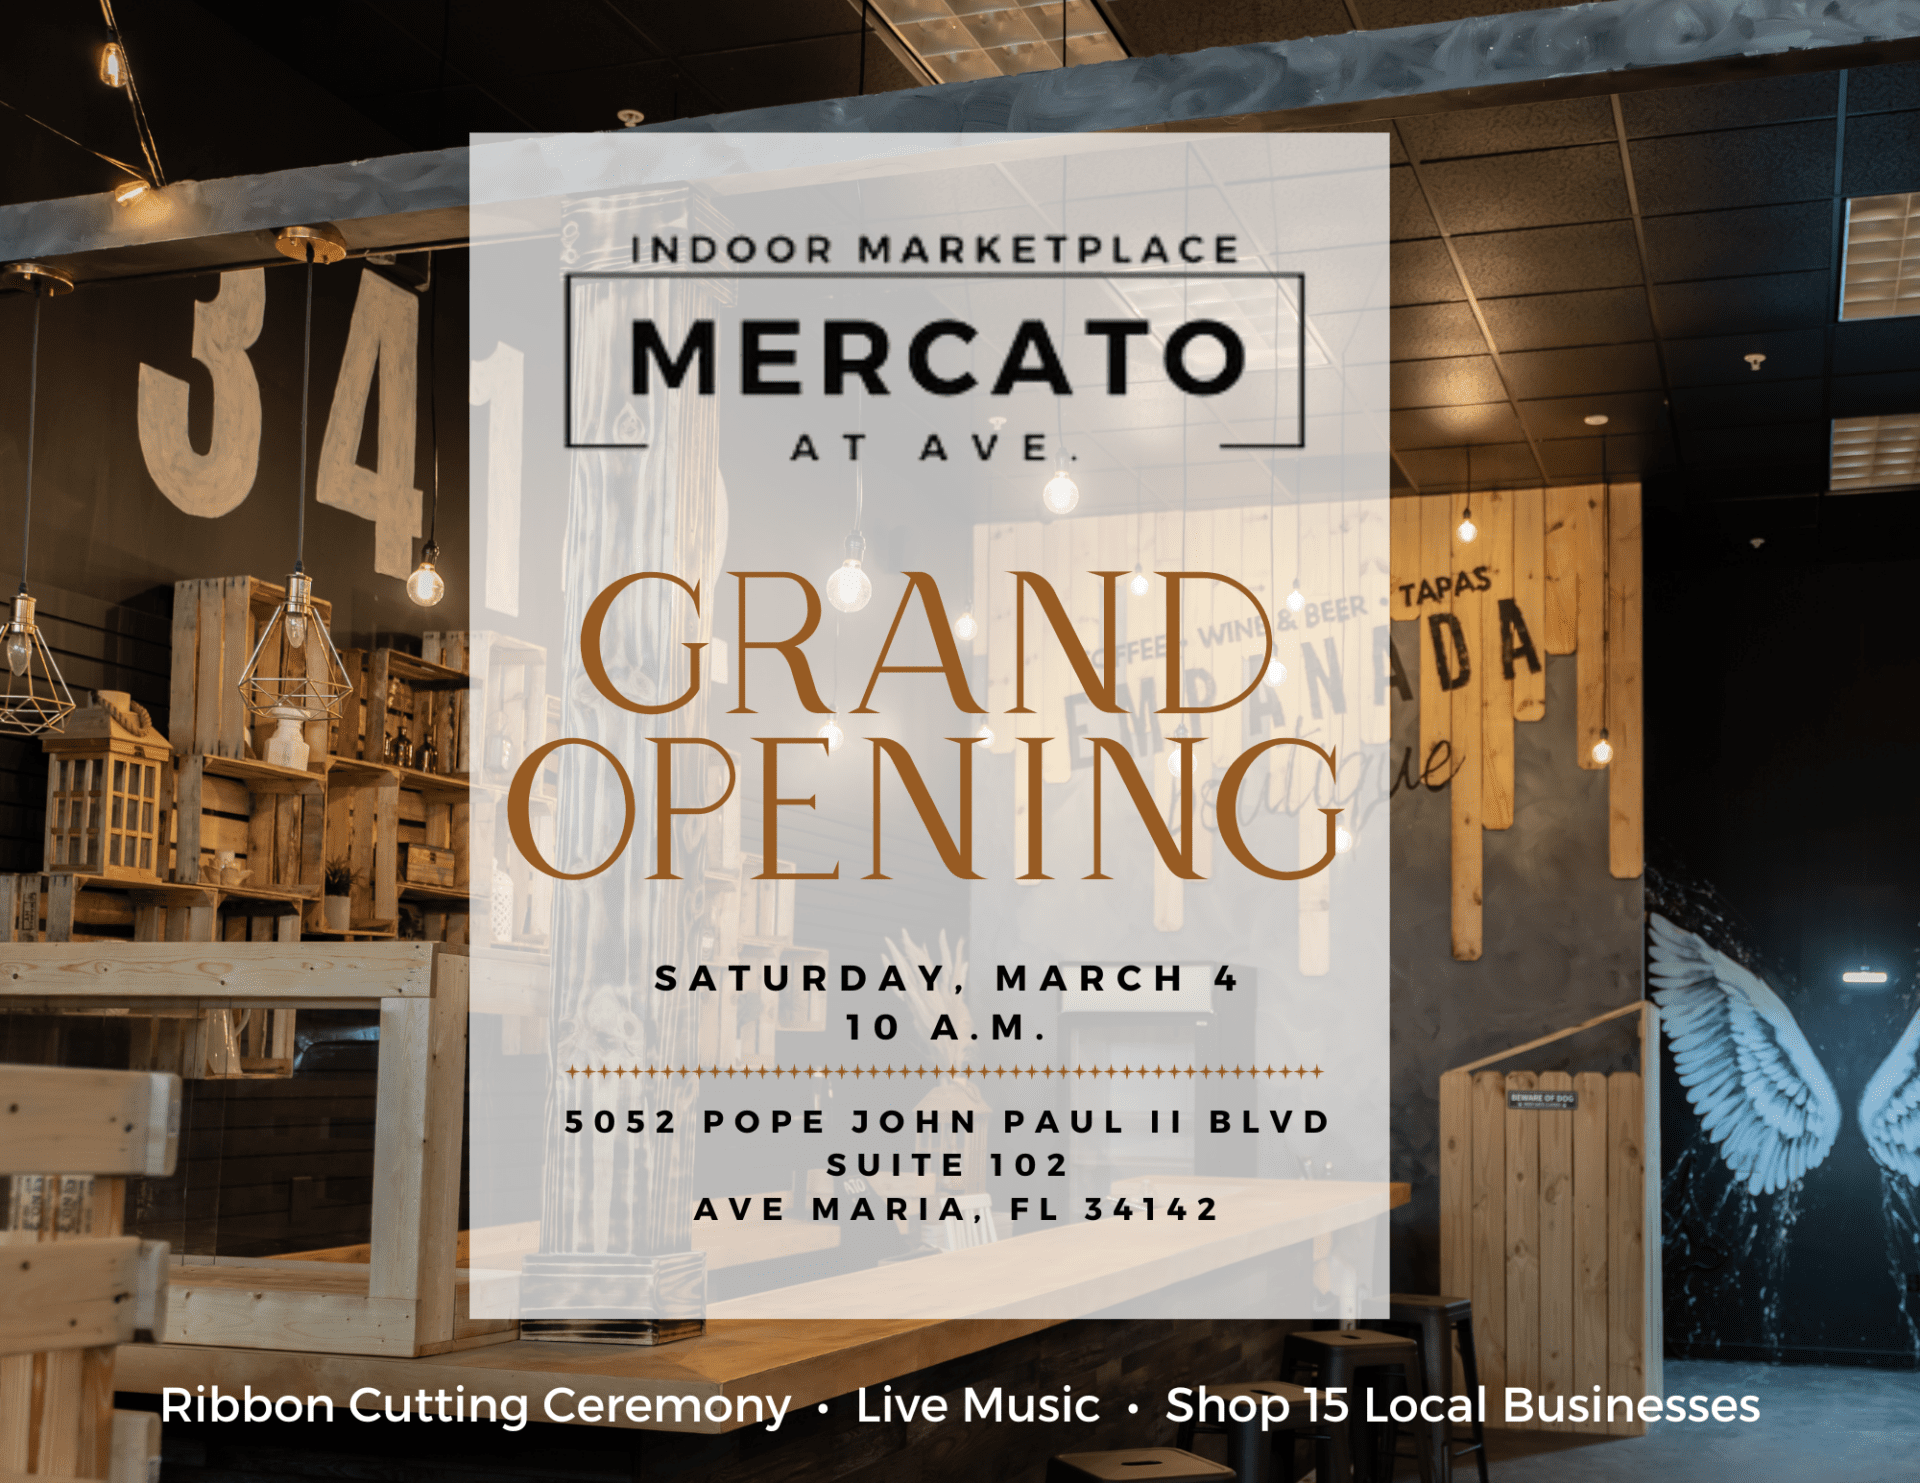 March 4, 2023 Grand Opening Flyer of Mercato at Ave